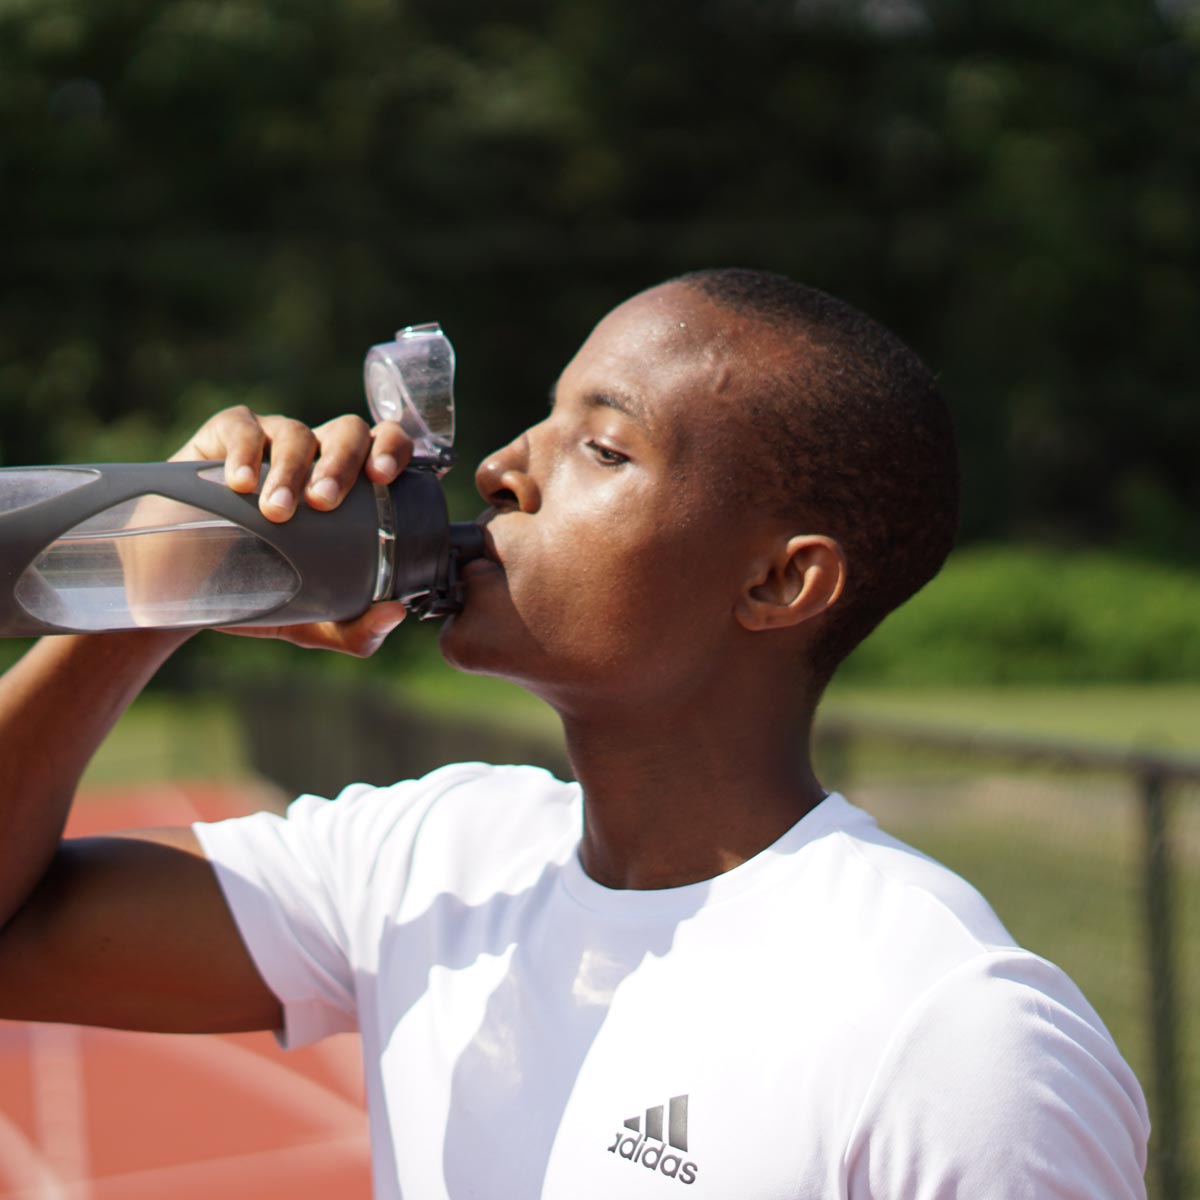 Man drinking from a water bottle at an outdoor running race track